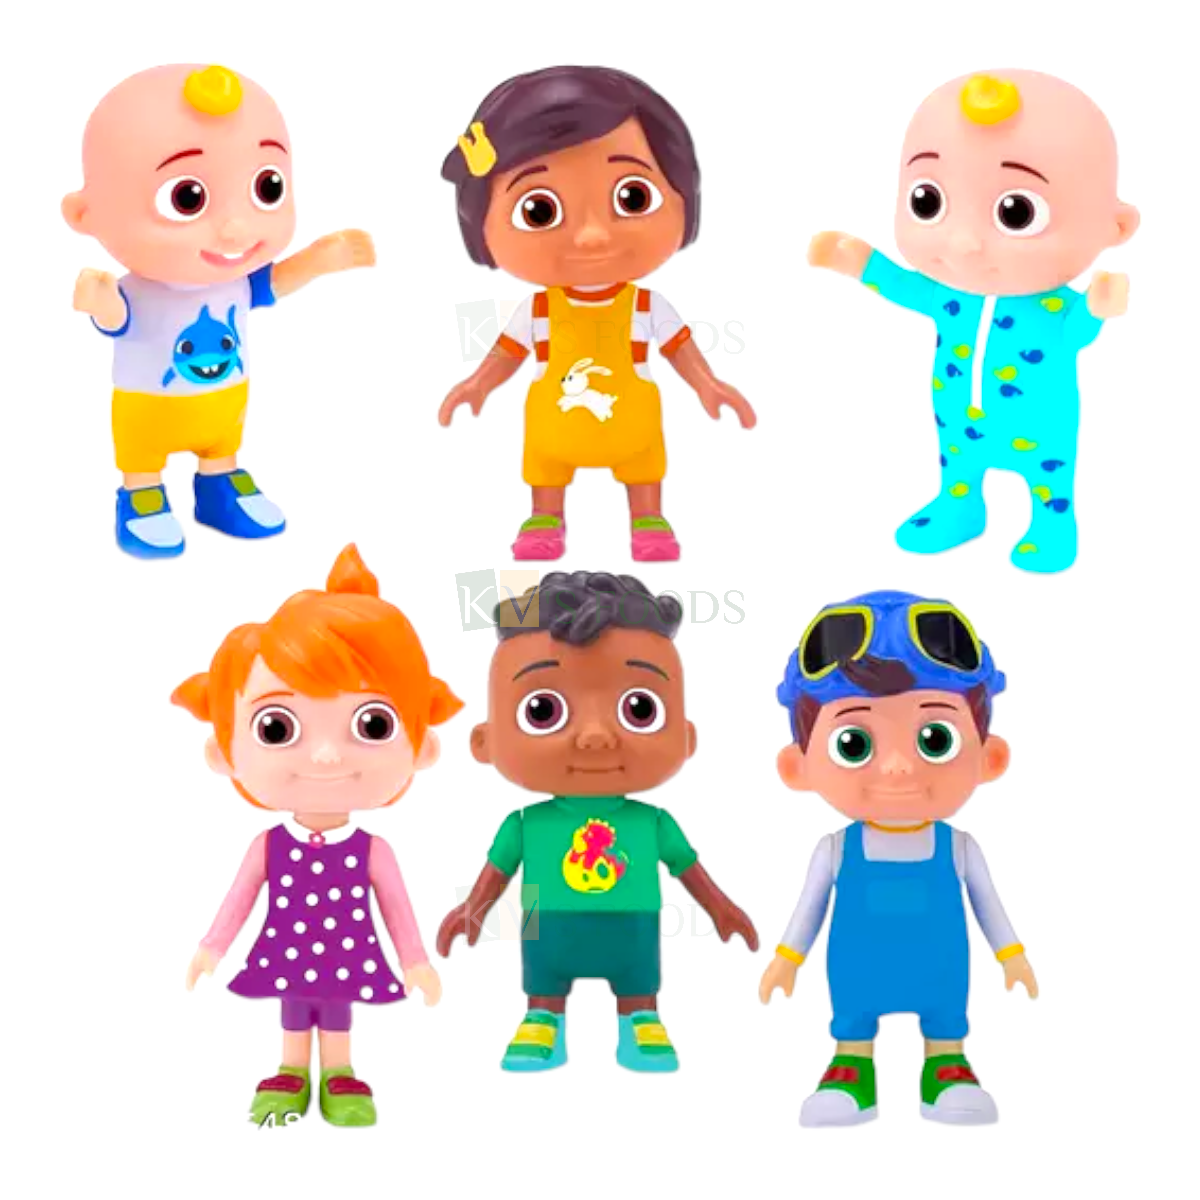 6 PC Multicoloured Cocomelon Cartoon Toy Set Cake Topper Cocomelon Friends &amp; Family Theme Toys, Character Cake Topper Features Two Baby JJ Figures (Tee and Onesie), Tomtom, YoYo, Cody, Nina Toys